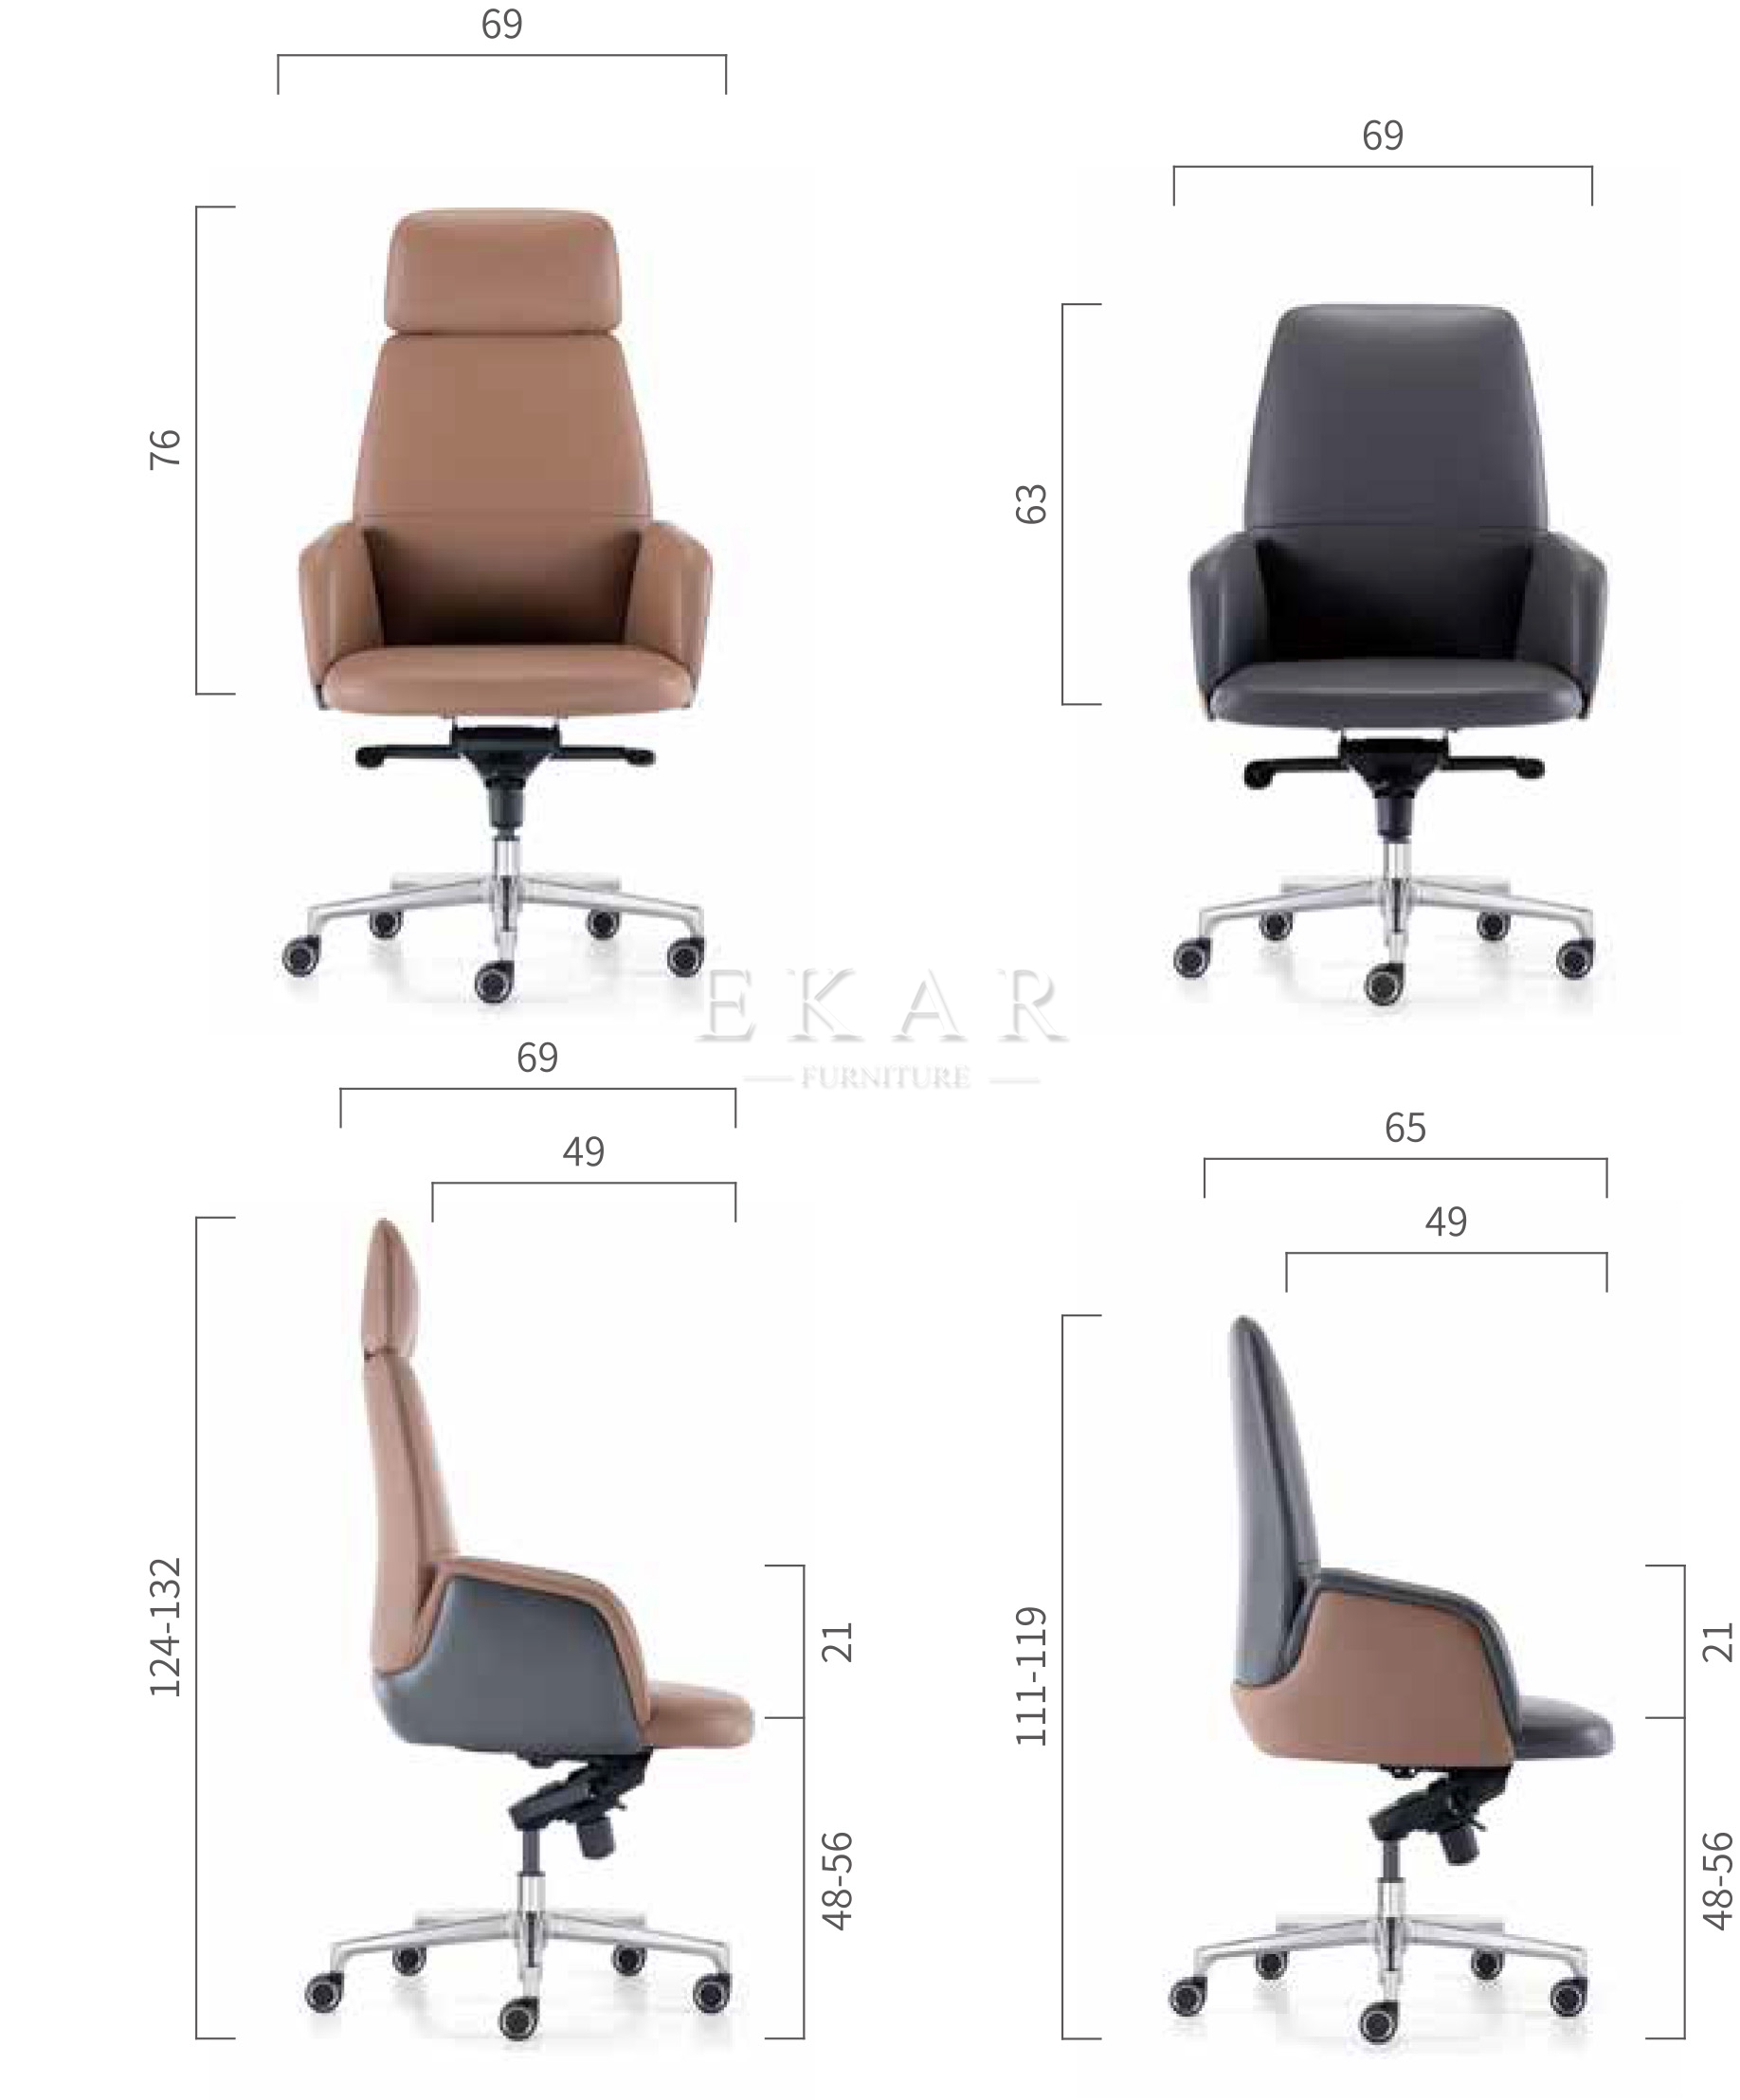 Postmodern Design High-End Leather Luxury Executive Office Chair